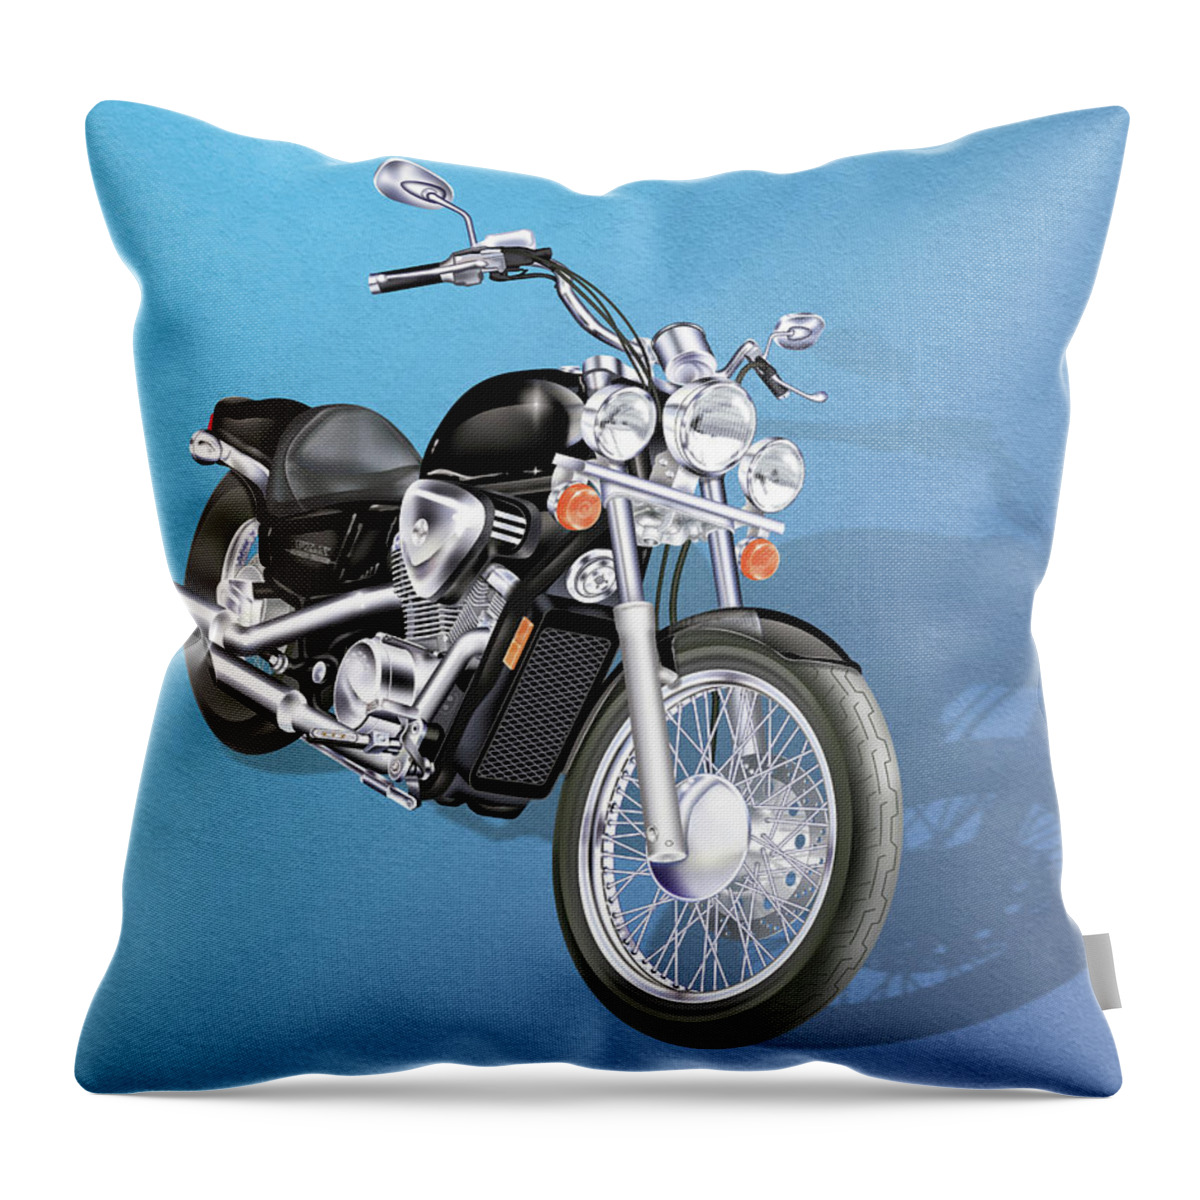 Motorcycle Throw Pillow featuring the digital art Motorcycle by Linda Carruth